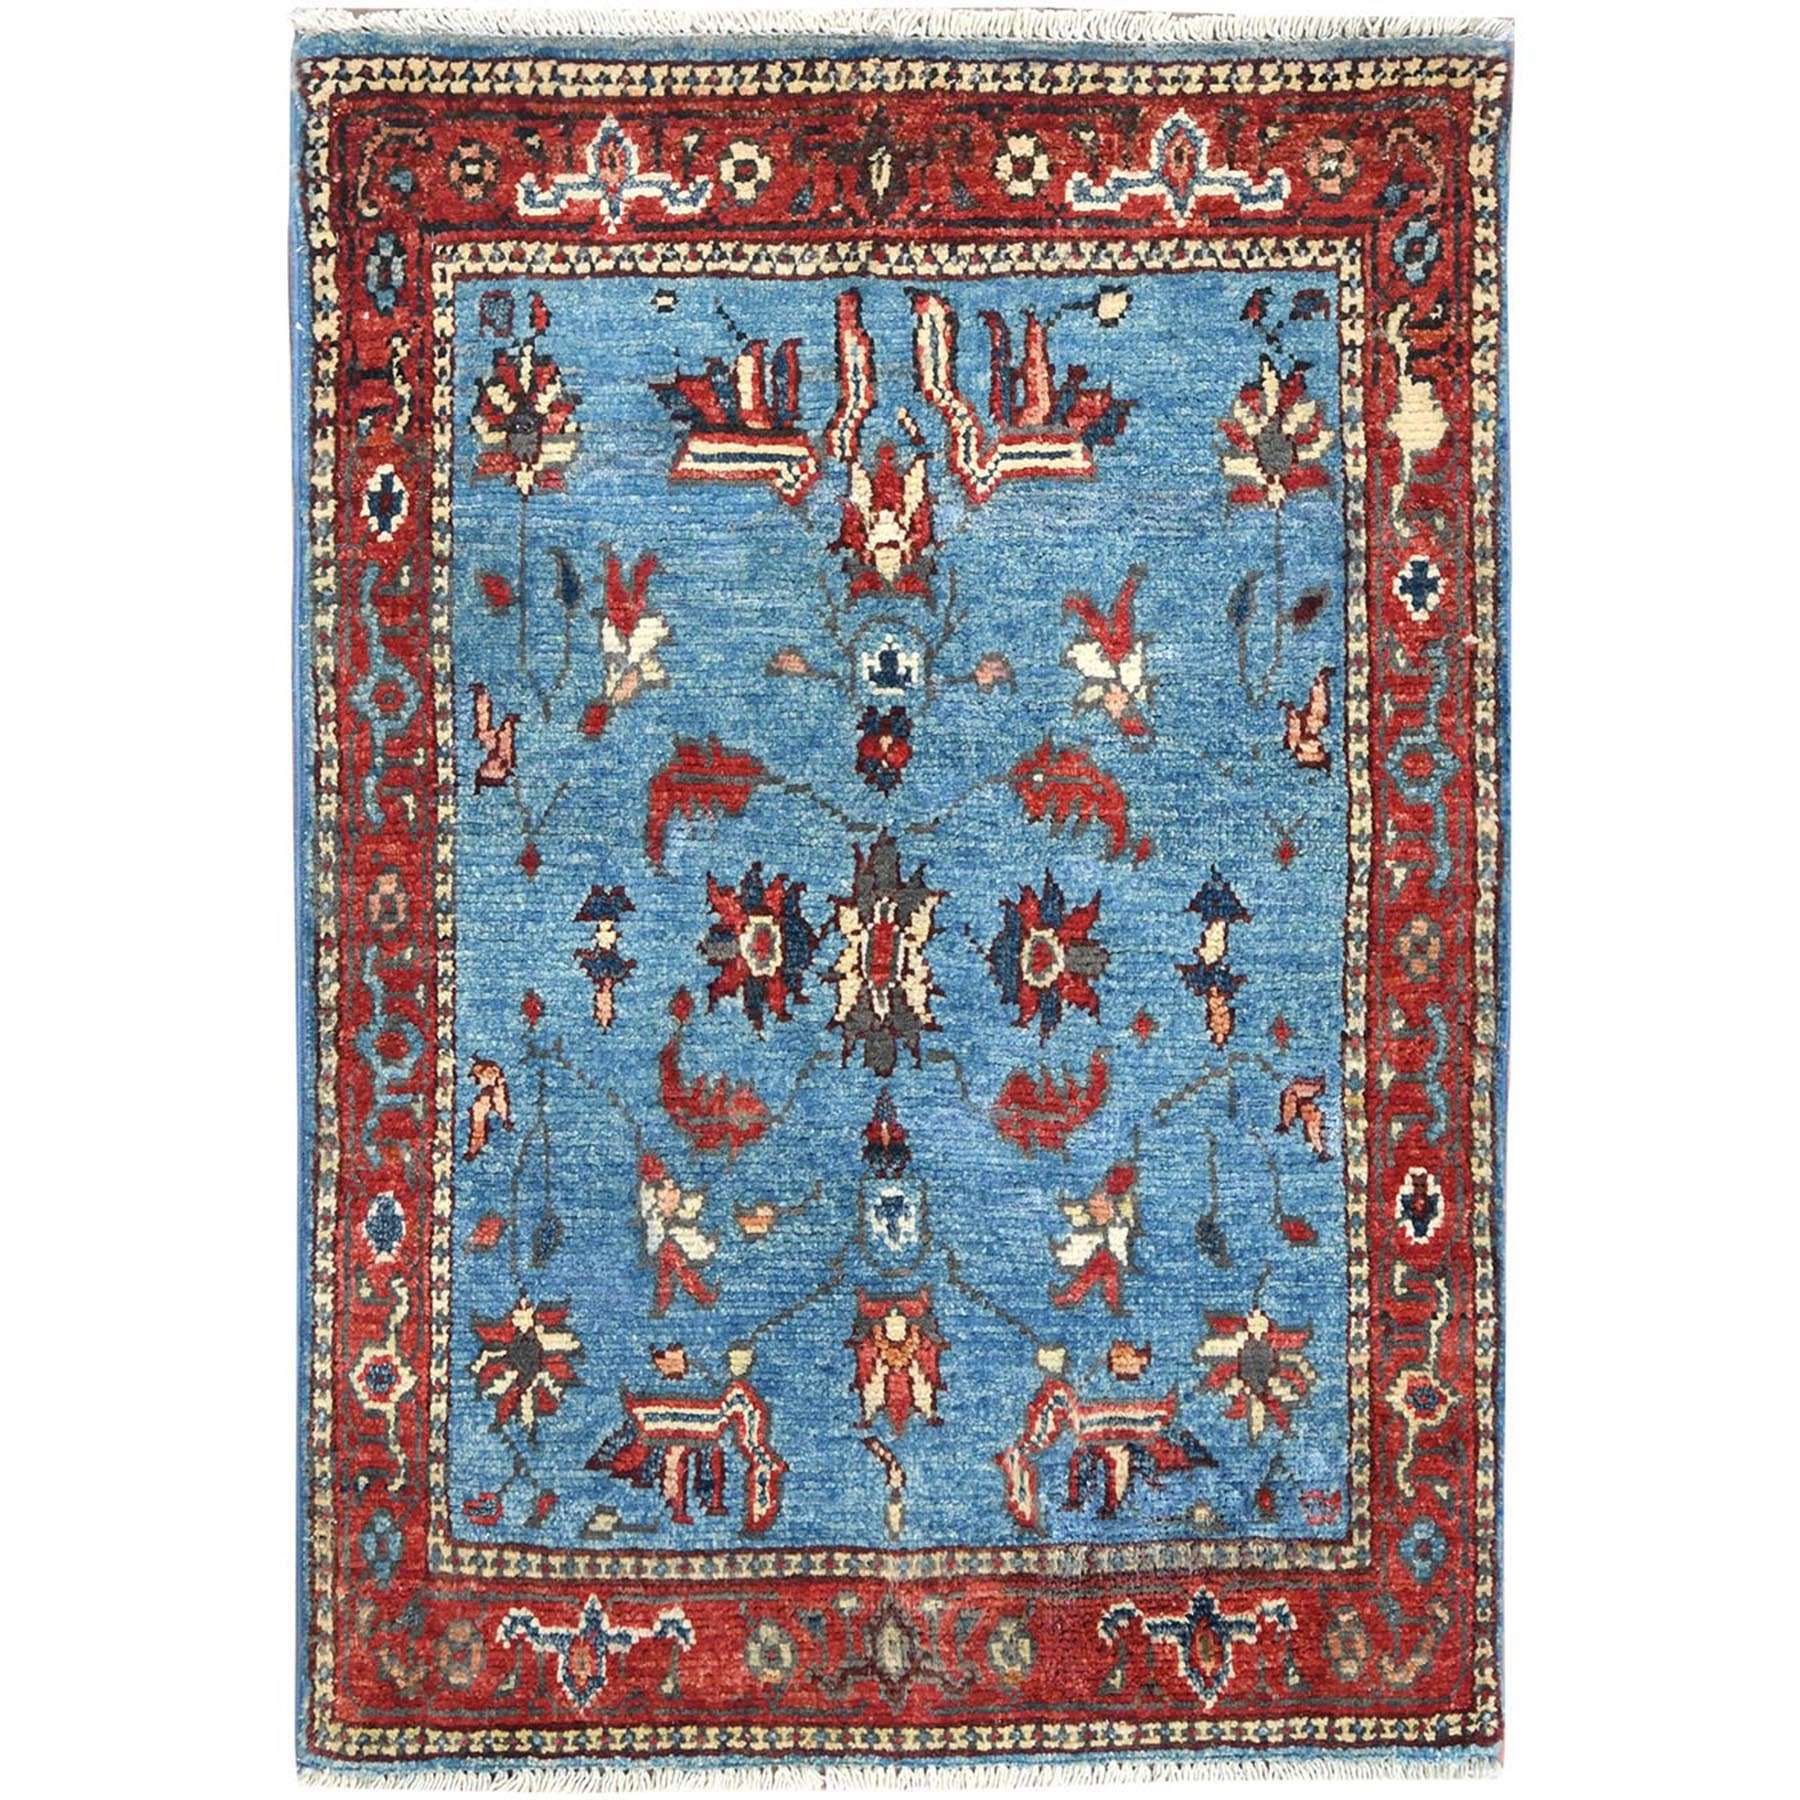  Wool Hand-Knotted Area Rug 2'1